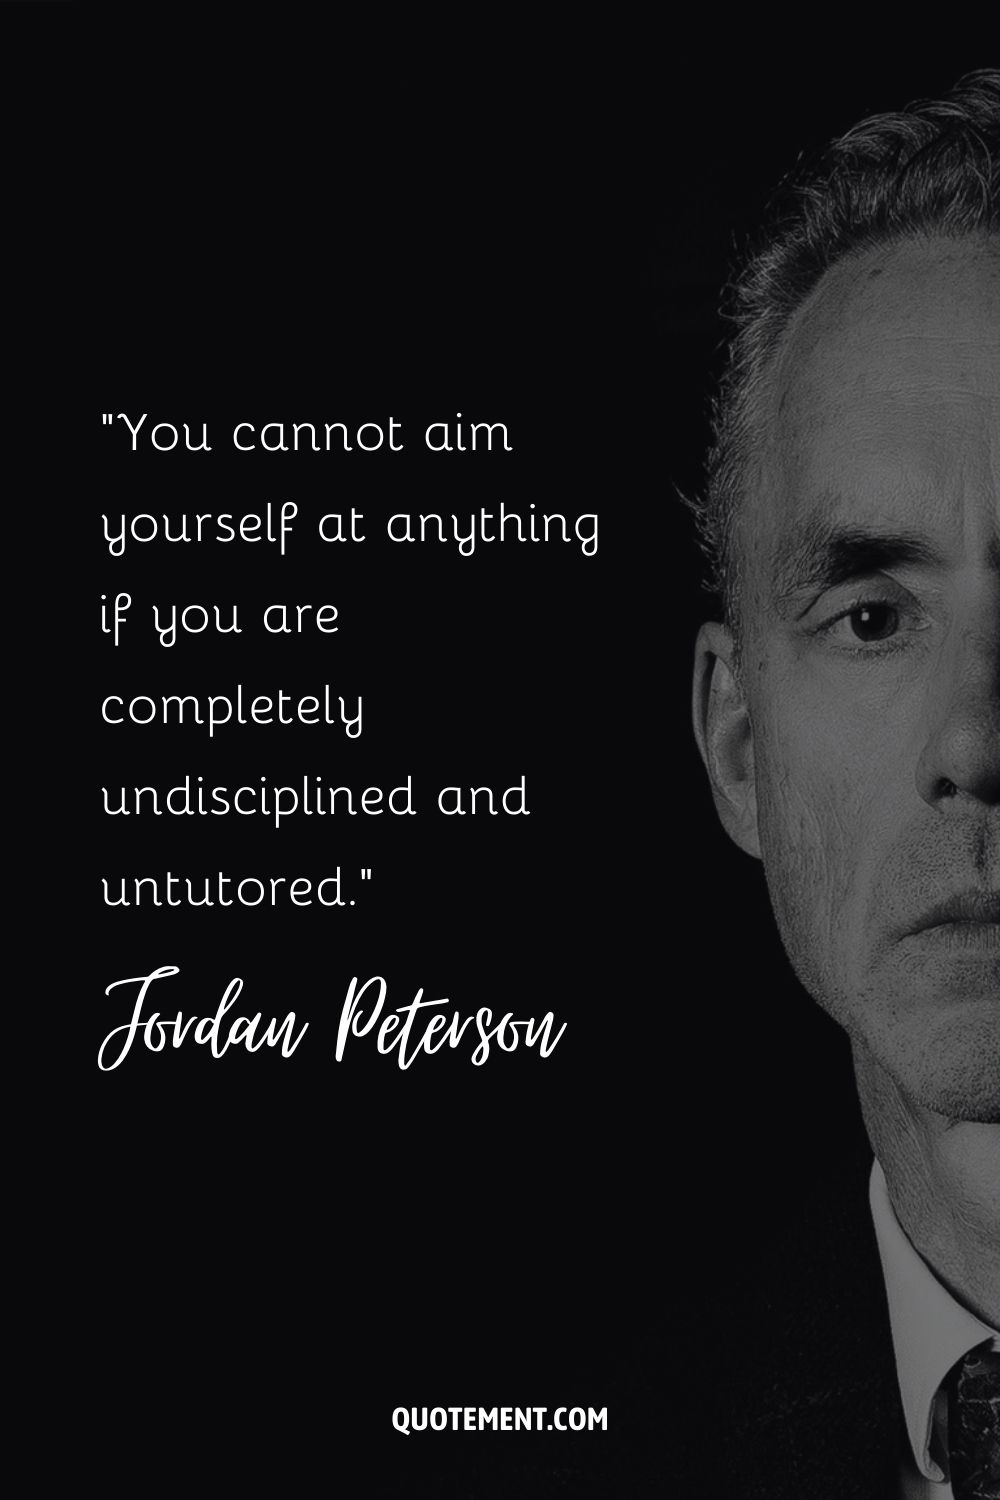 You cannot aim yourself at anything if you are completely undisciplined and untutored